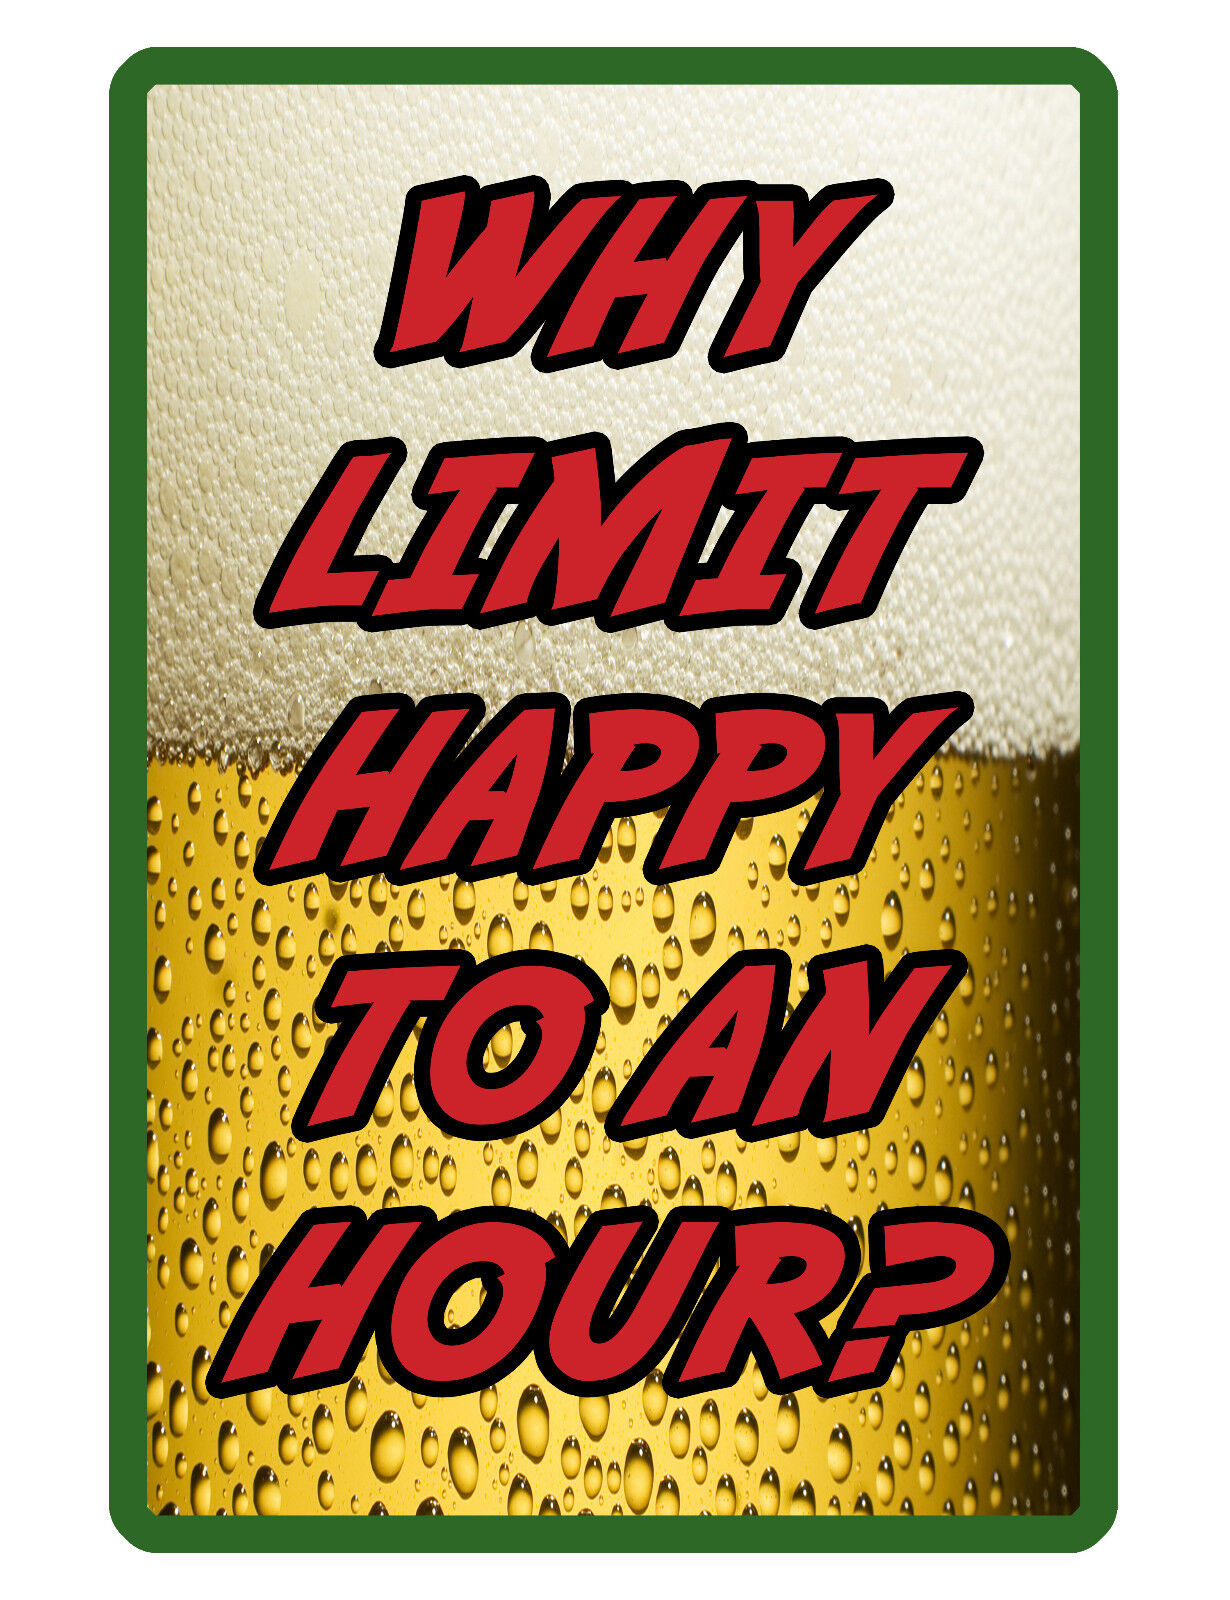 HAPPY HOUR SIGN METAL SIGN Durable Aluminum WEATHER PROOF NO RUST BAR SIGN #320